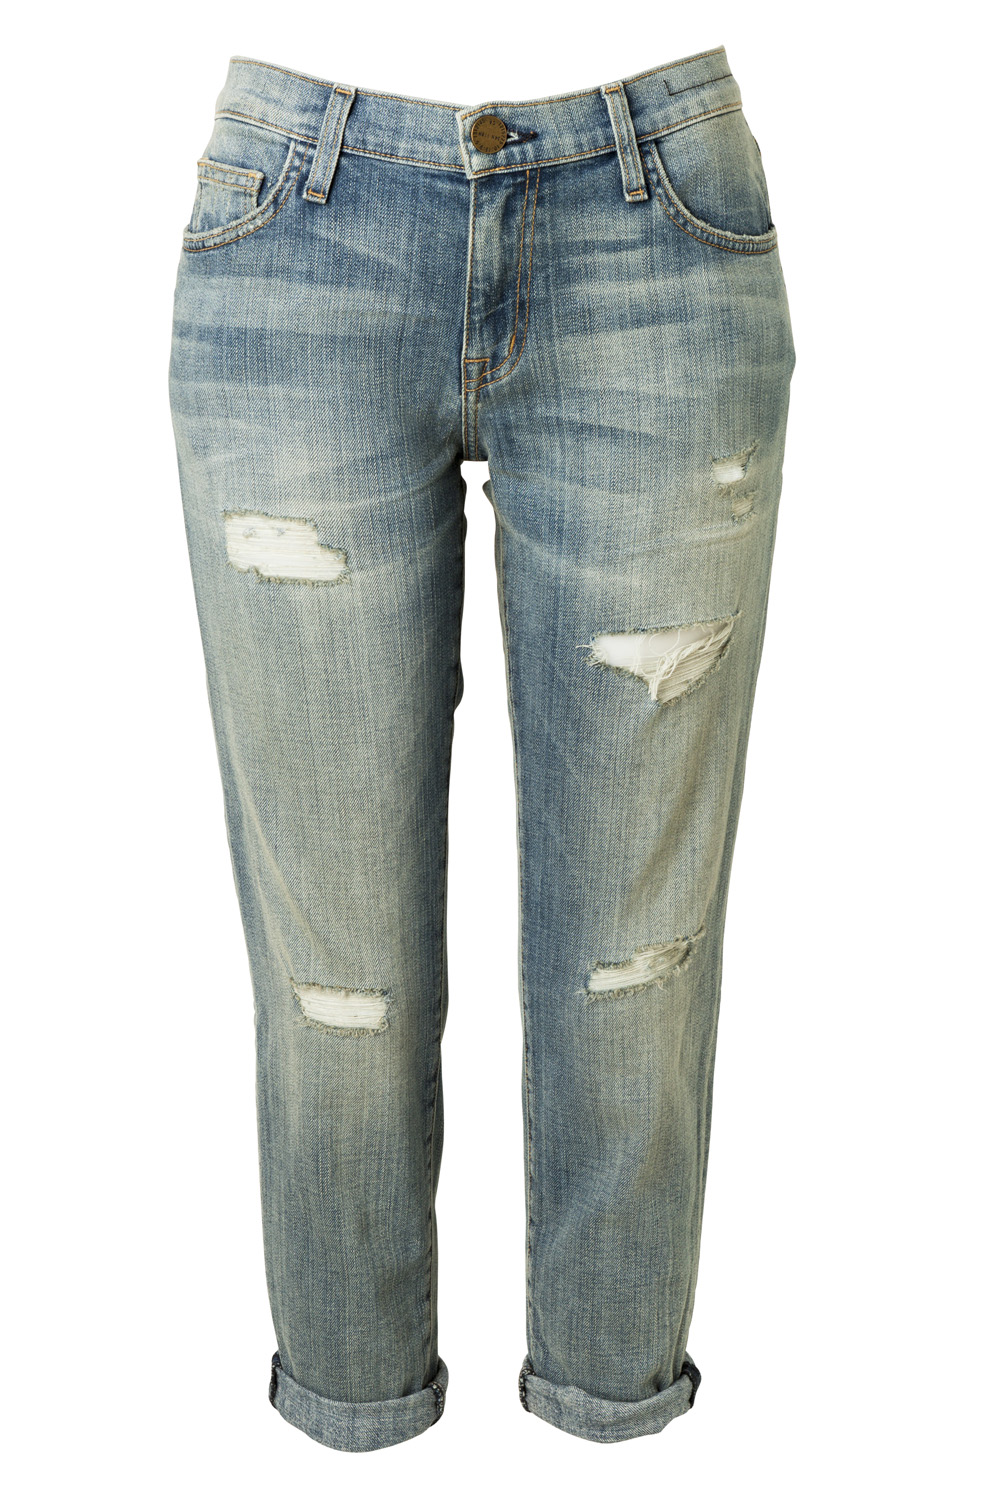 Current Elliot jeans, $445, from Harry’s.